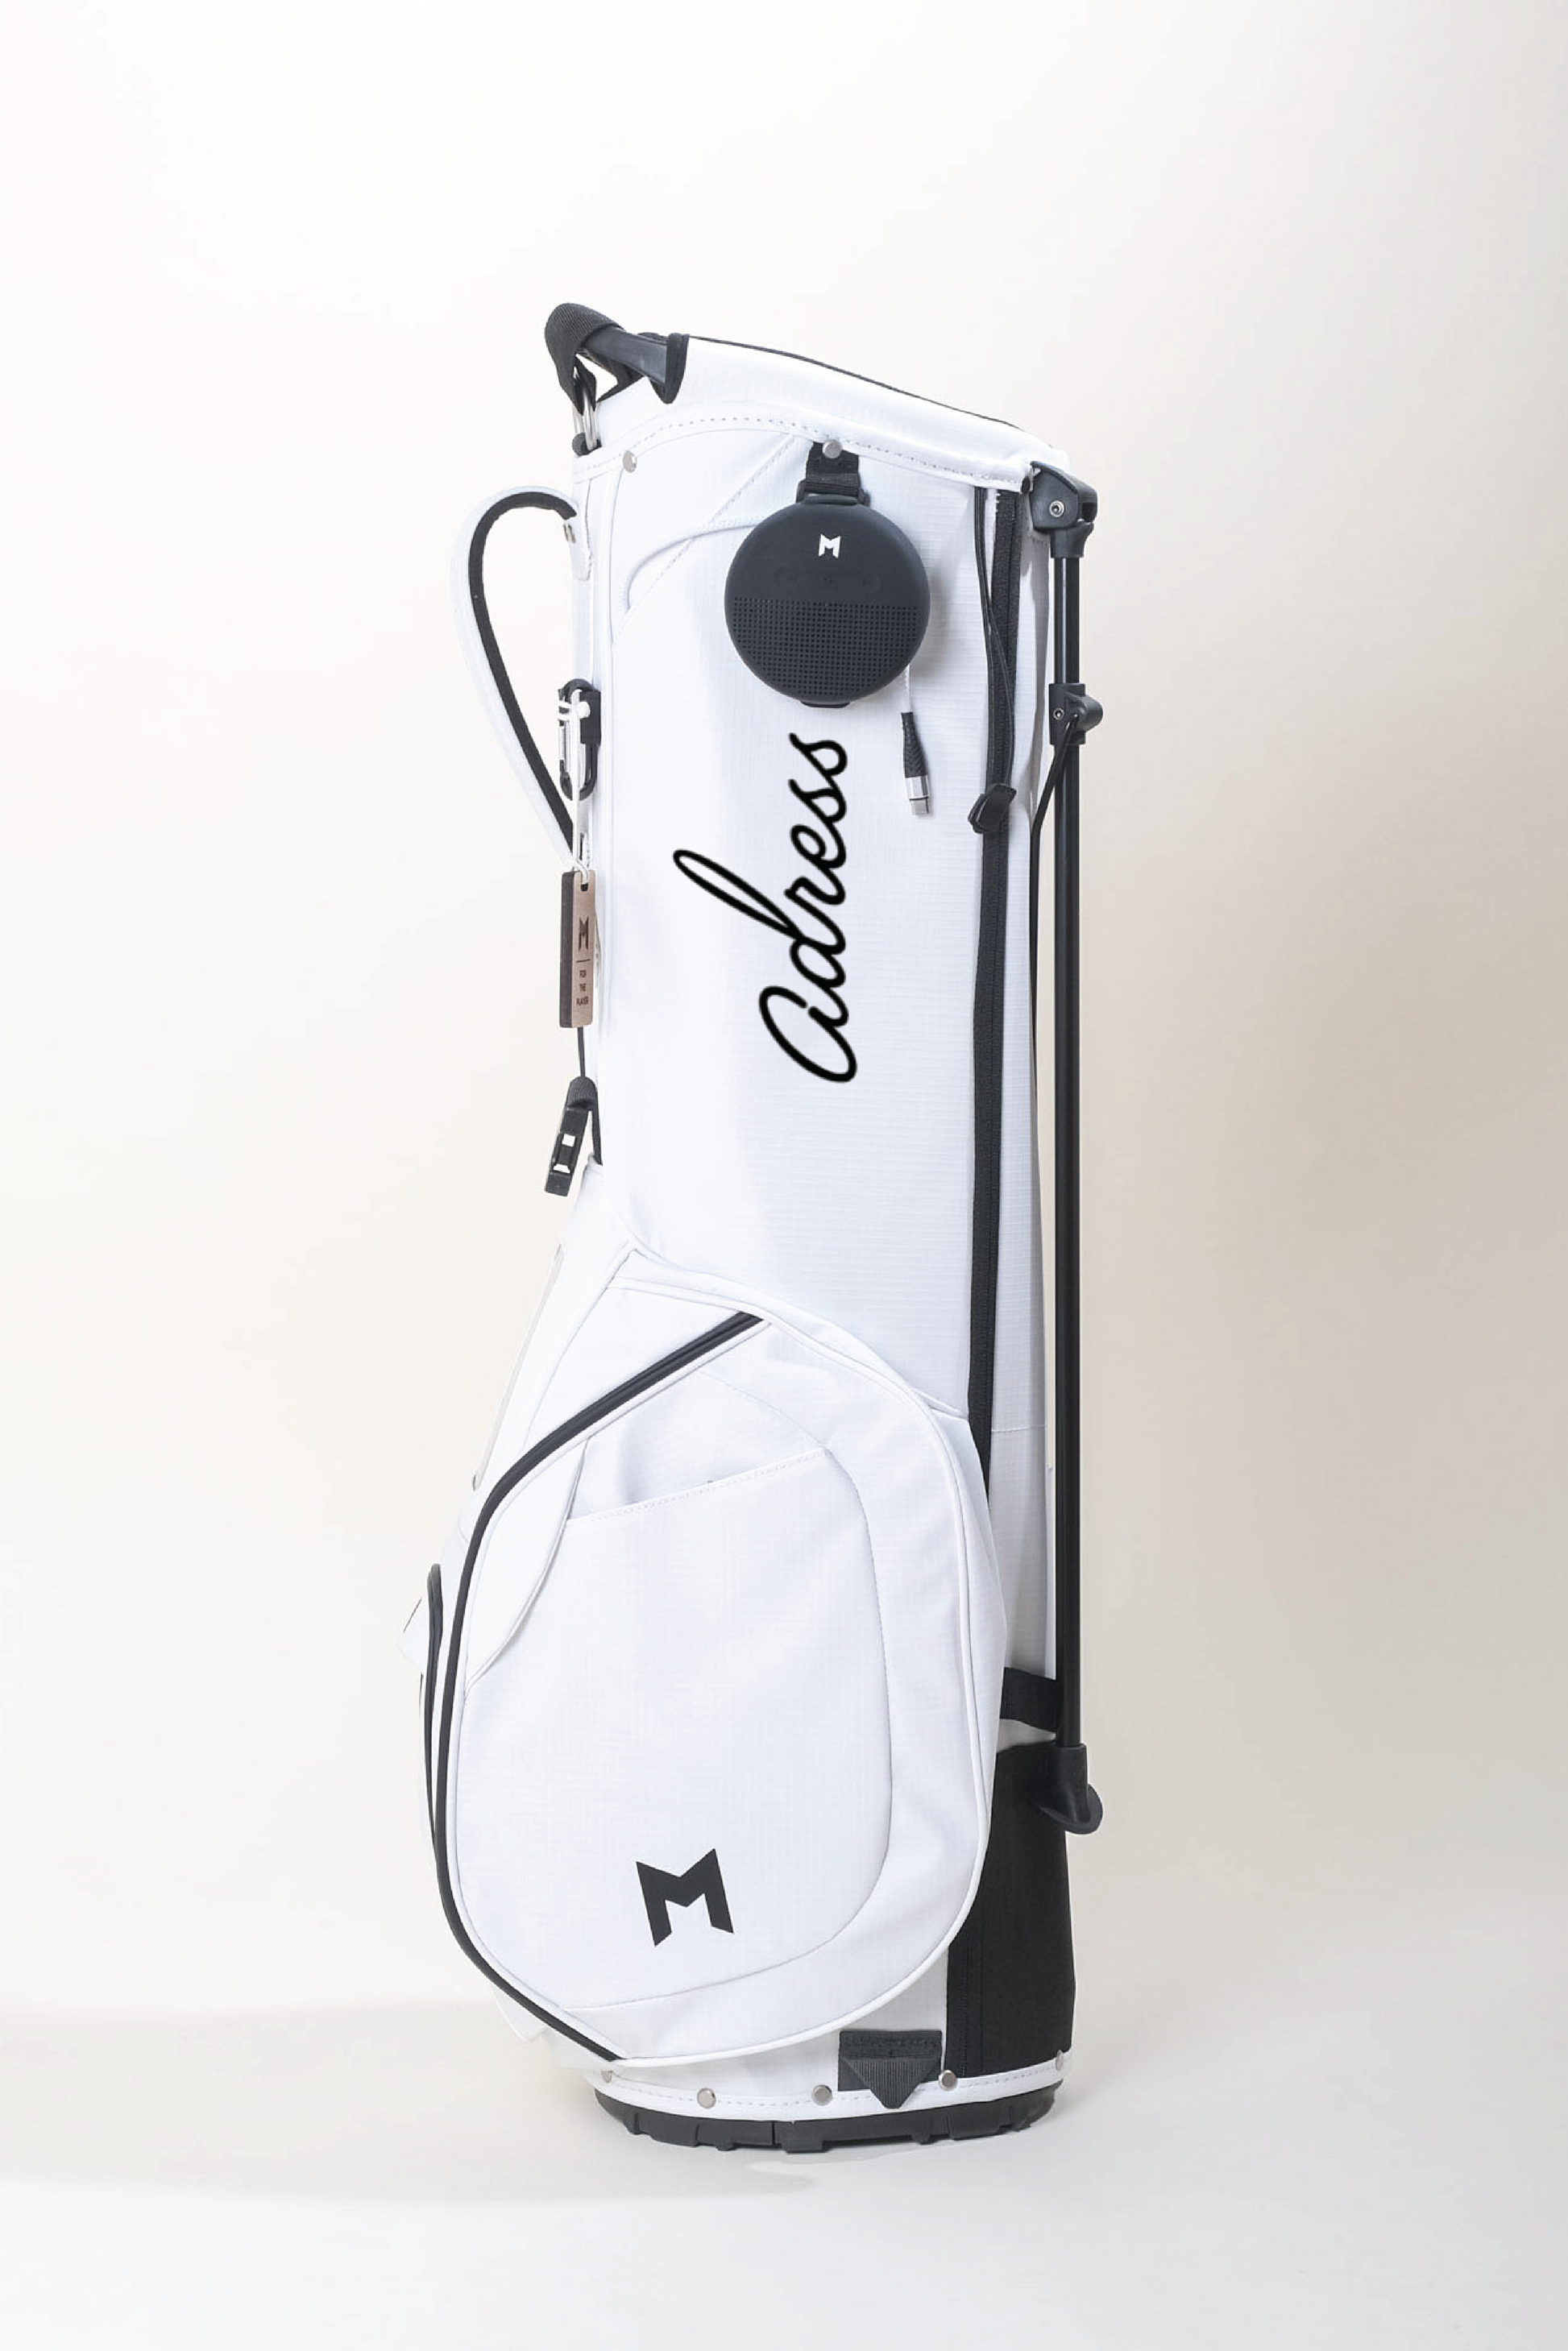 MNML GOLF collaborated with Adress golf company. The white MR1 features the Adress golf logo in contrasting black paint on bright white  recycled ripstop.